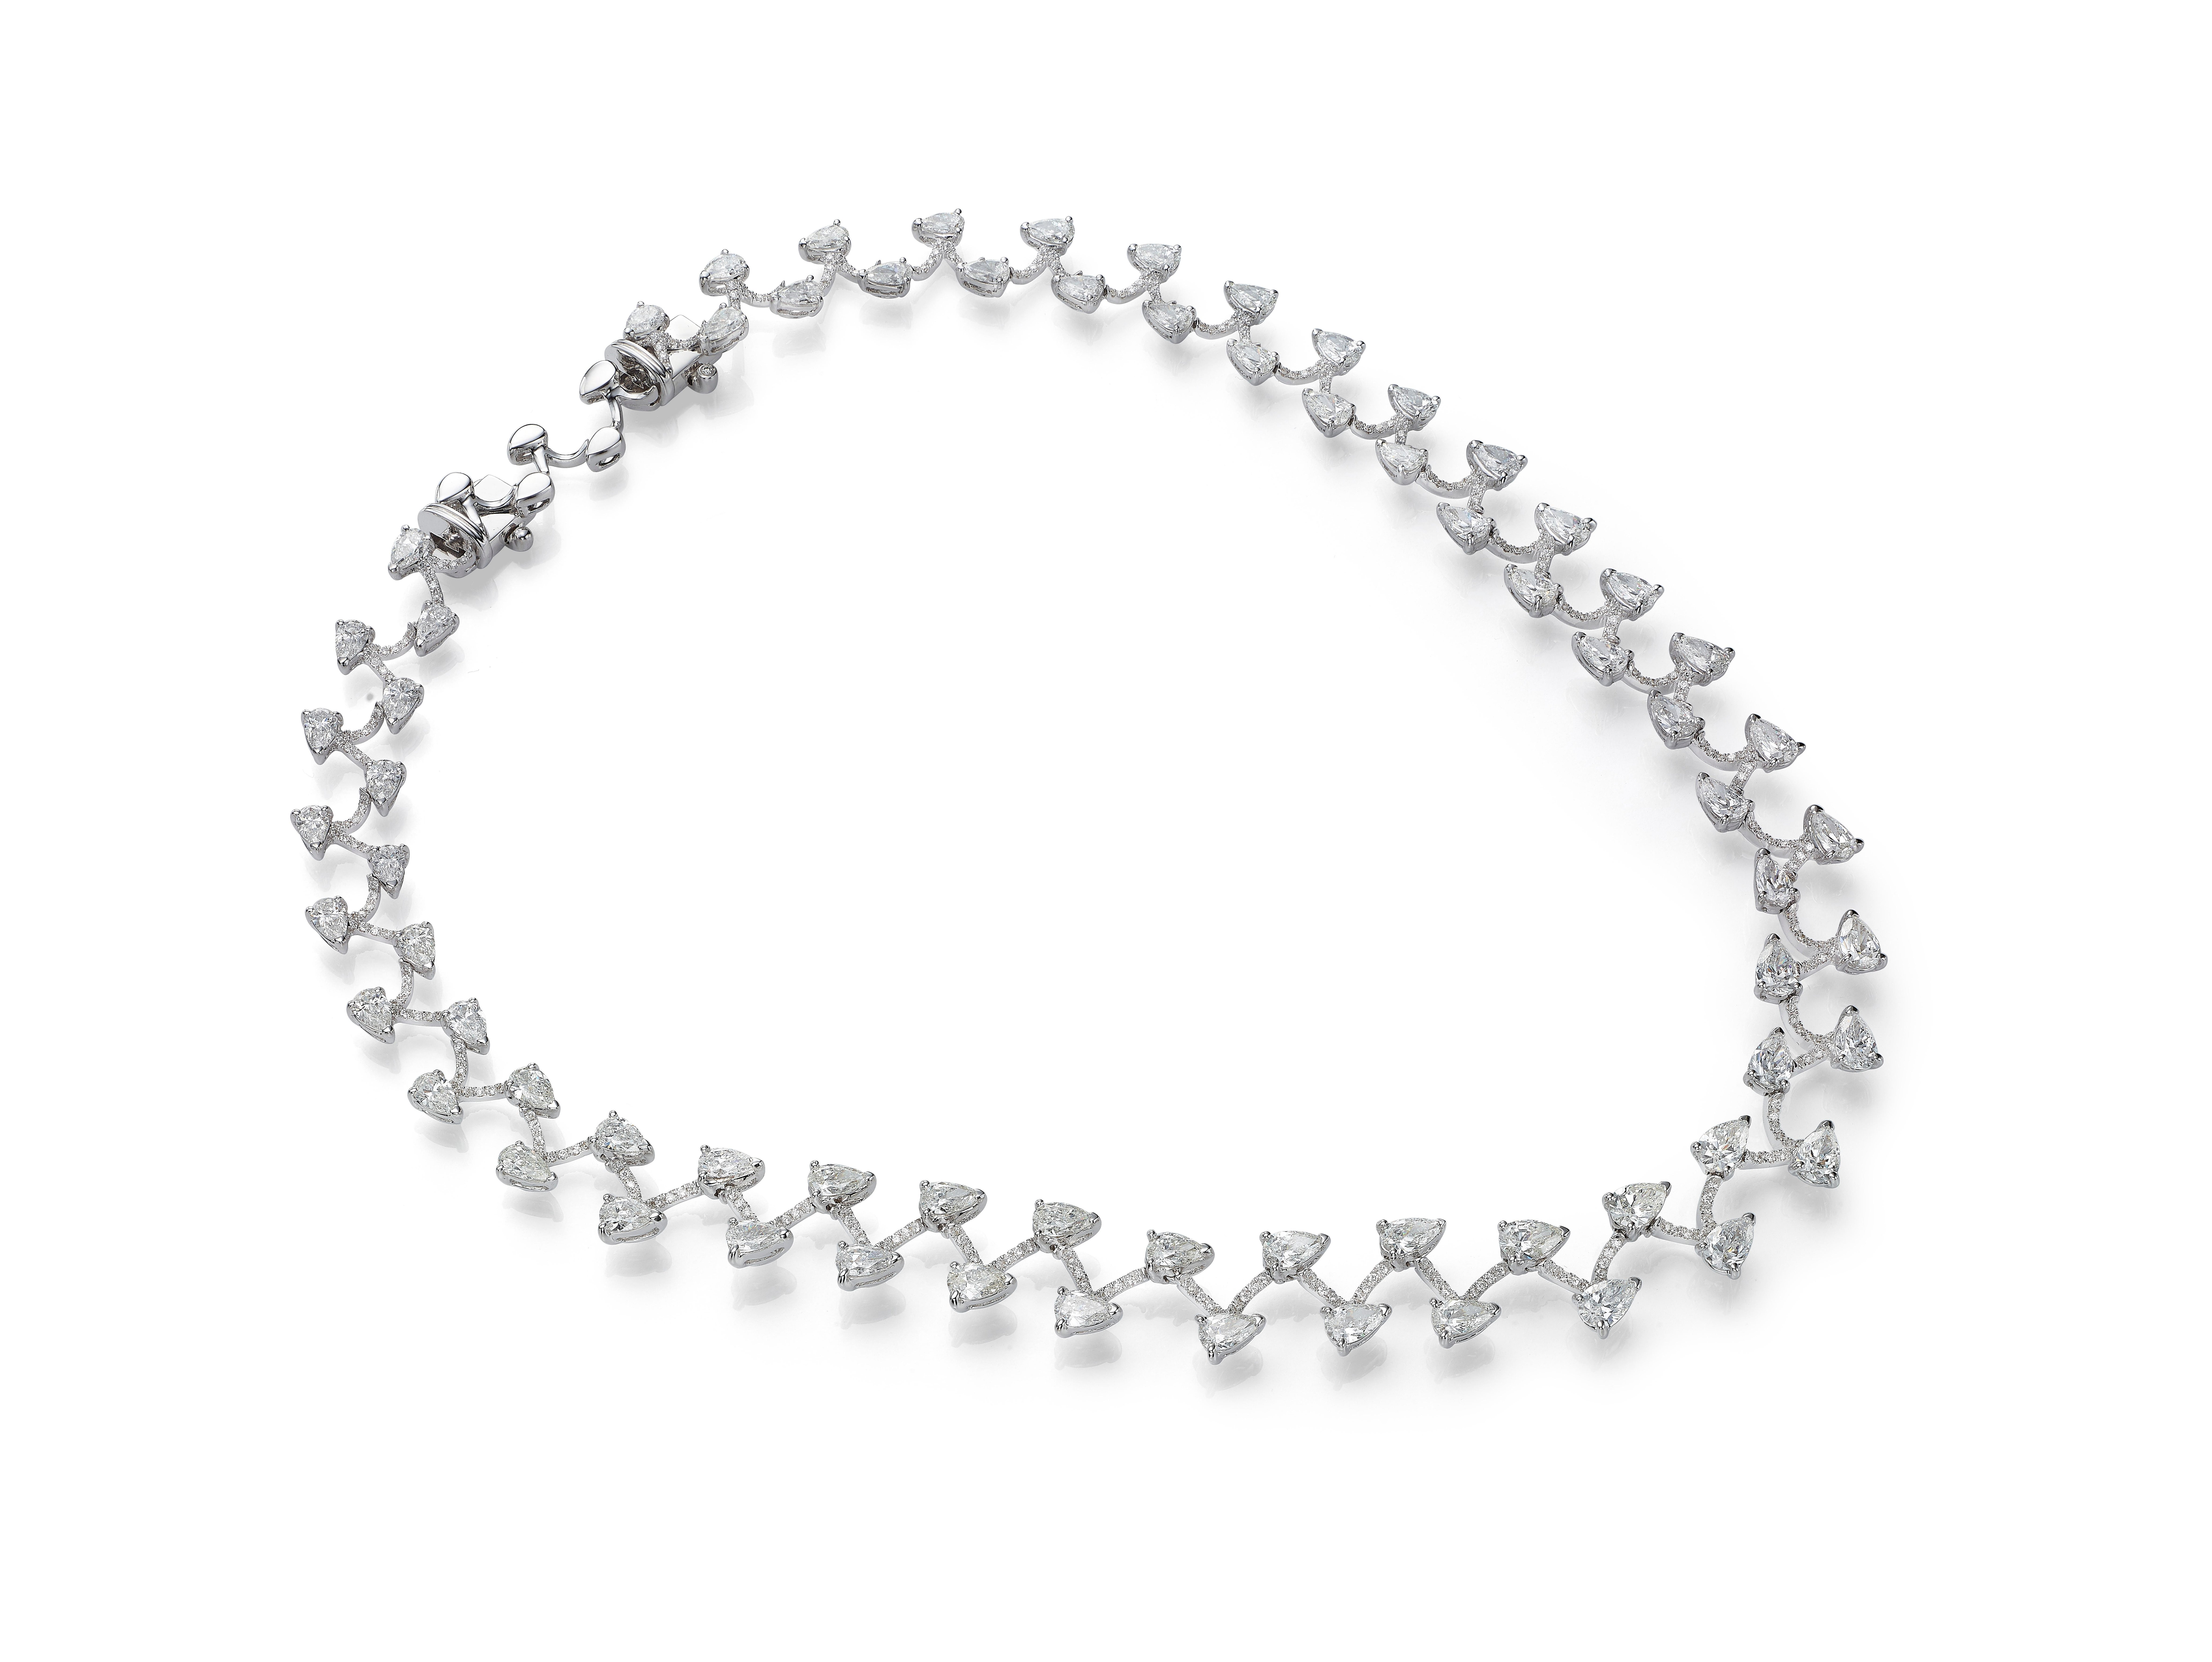 Handmade from 18K white gold, this collar necklace has over 70 glittering pear-cut diamonds (totaling 17.89 carats) and round brilliant-cut diamonds  (totaling 1.47 carats).  Length is 15 inches.  The necklace comes with a 1 inch white gold